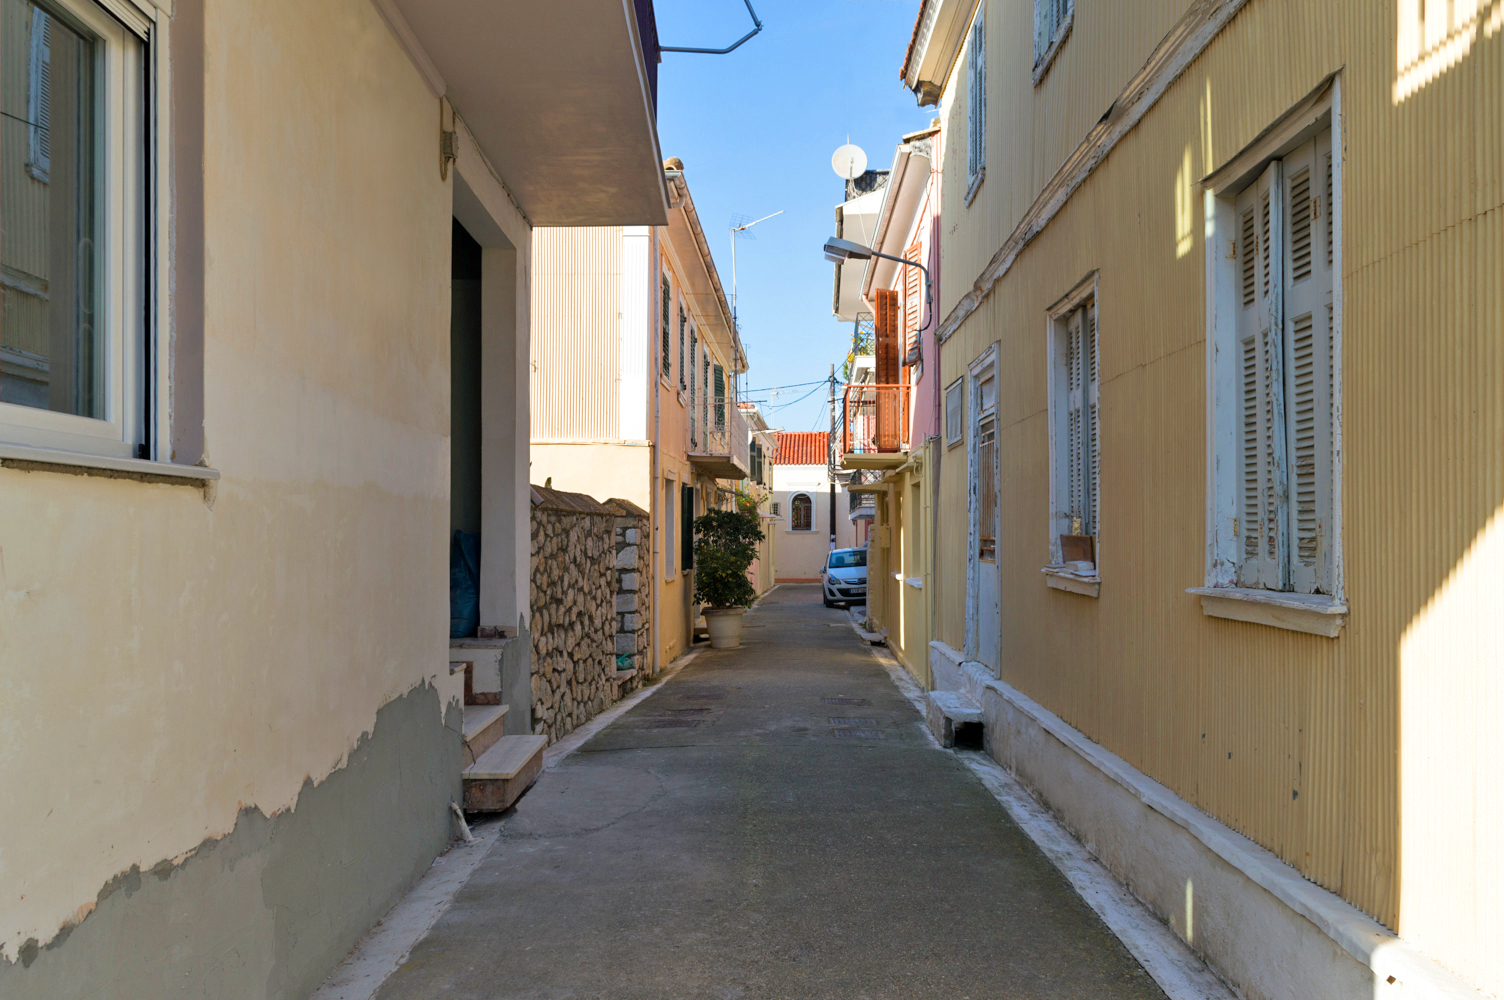 Picturesque sidestreet in Lefkada's old town | Lefkada Slow Guide